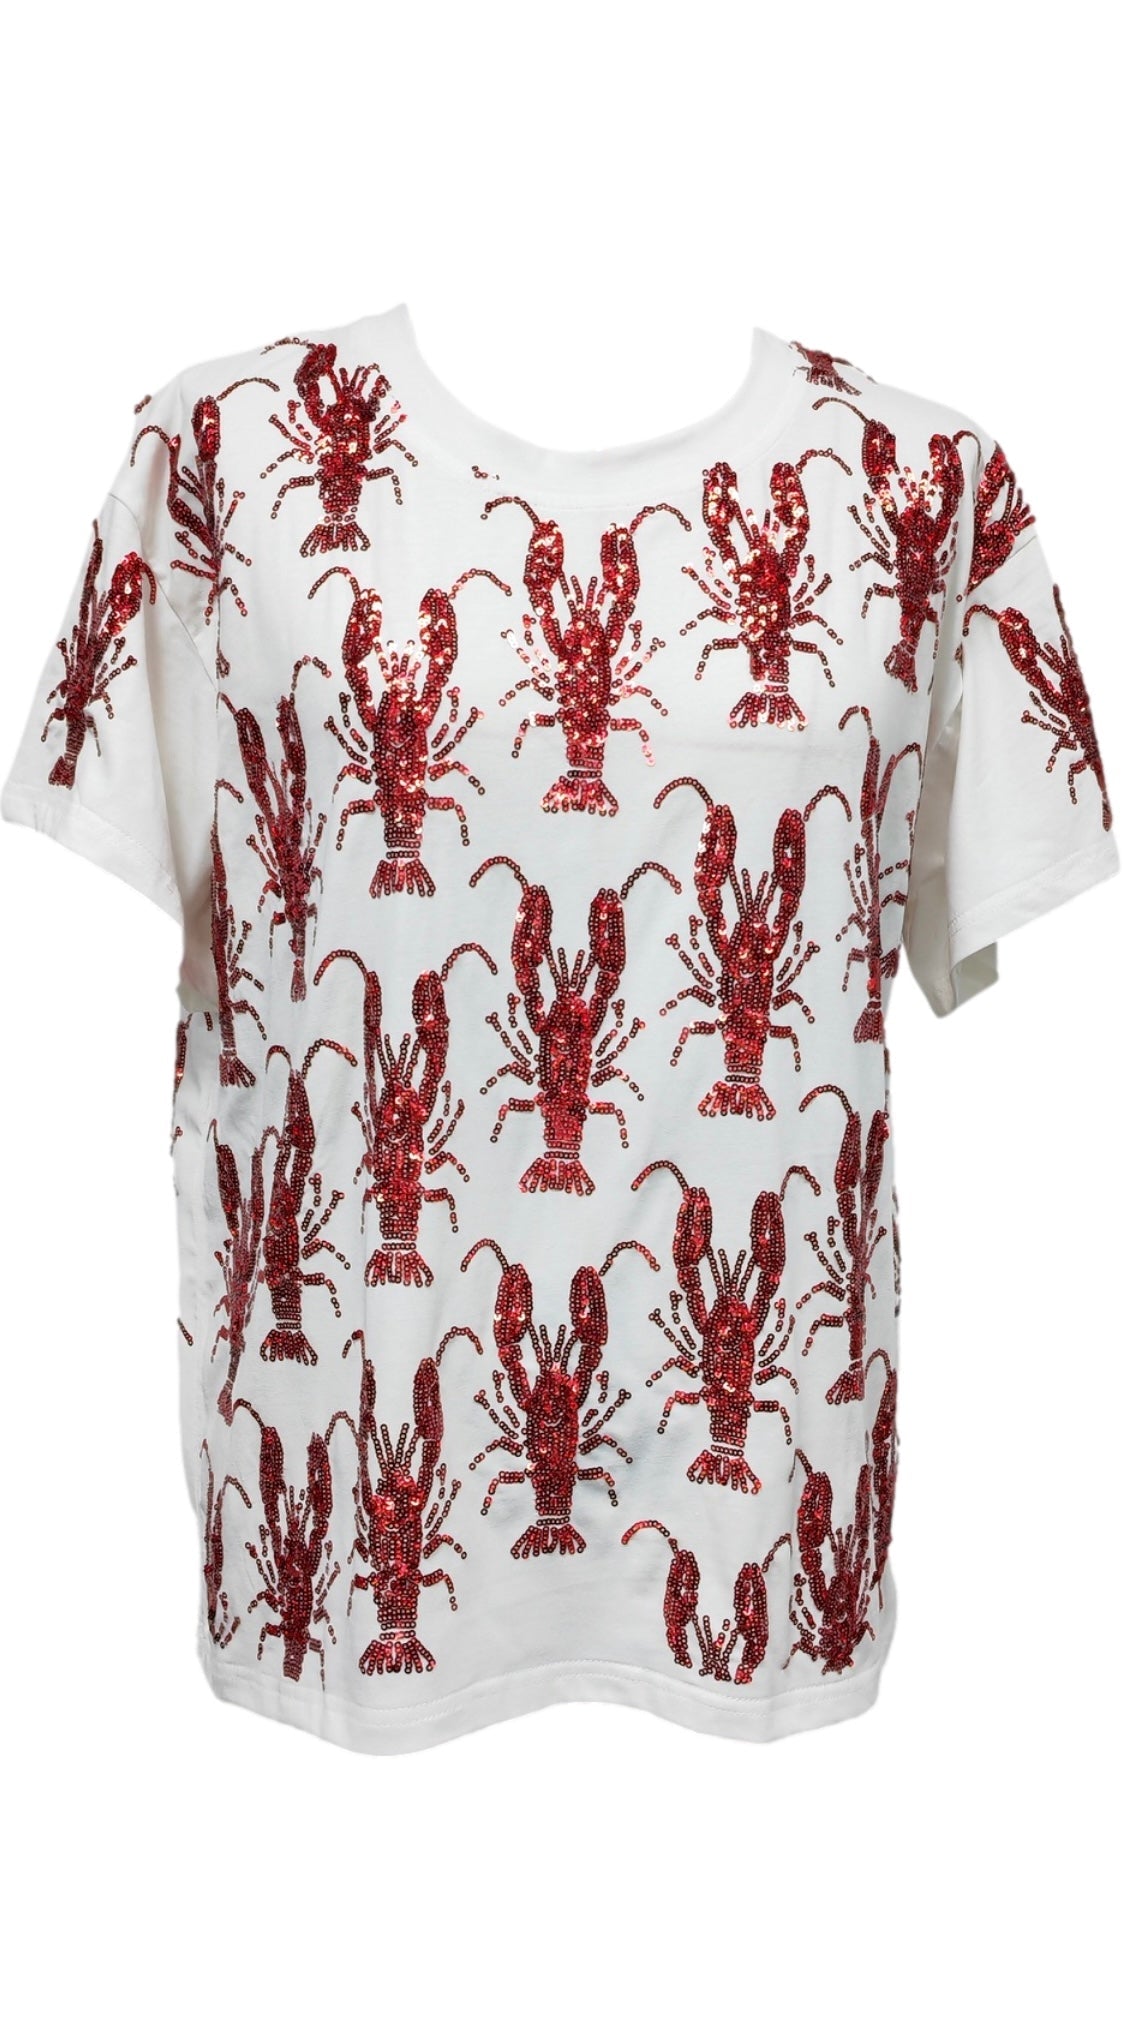 White & Red Scattered Crawfish Tee | Queen of Sparkles